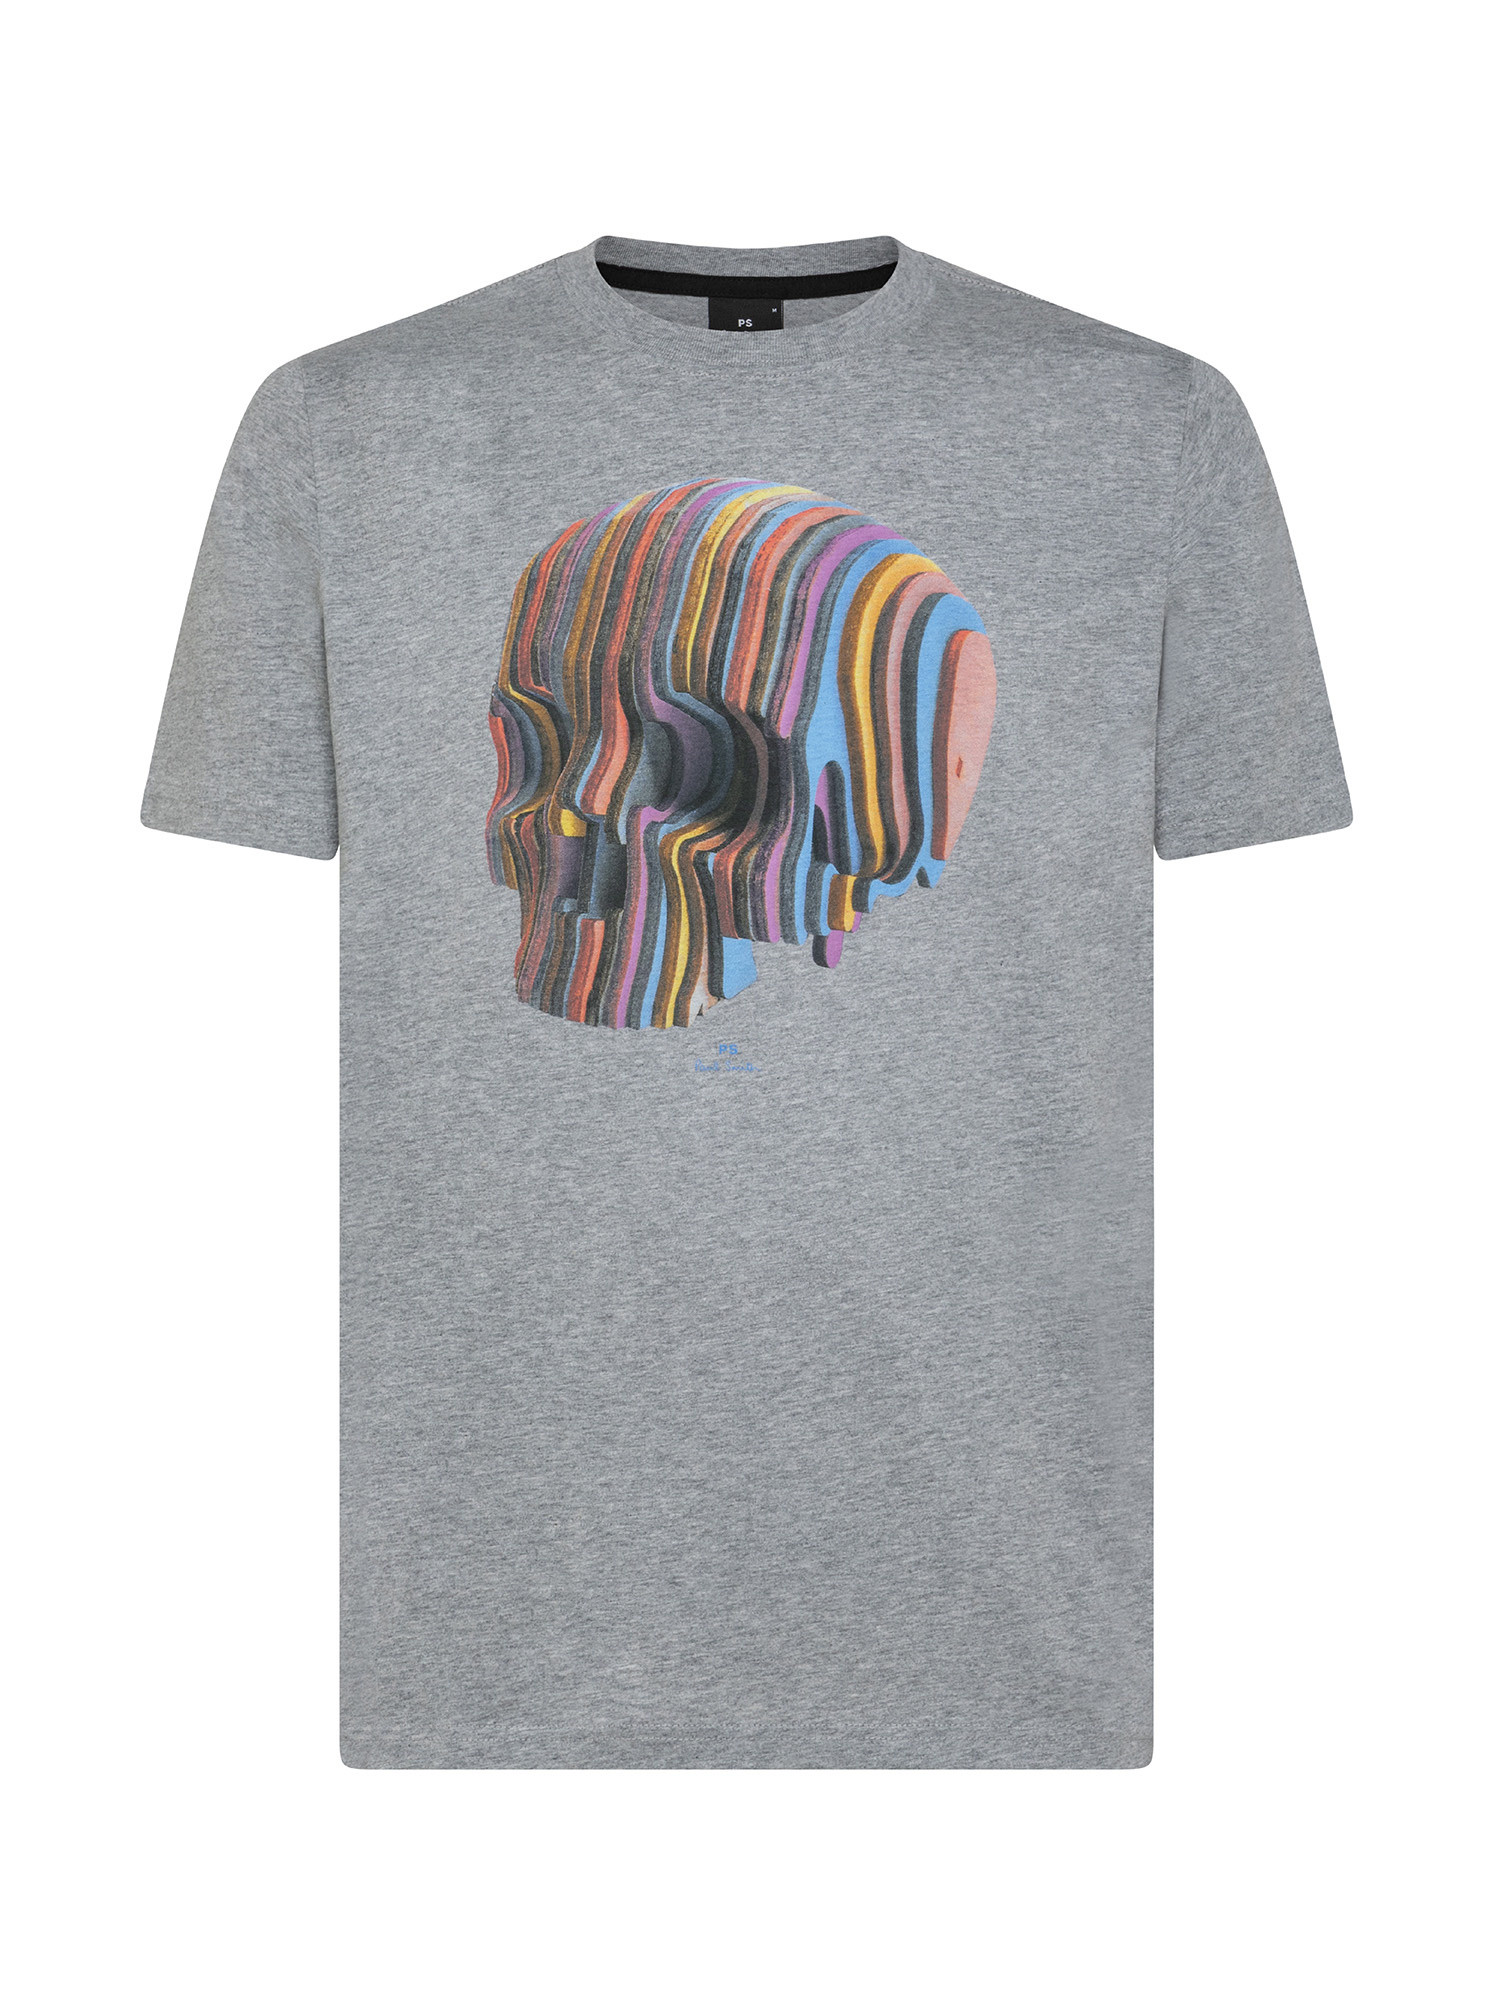 T-shirt con stampa teschio, Grigio, large image number 0